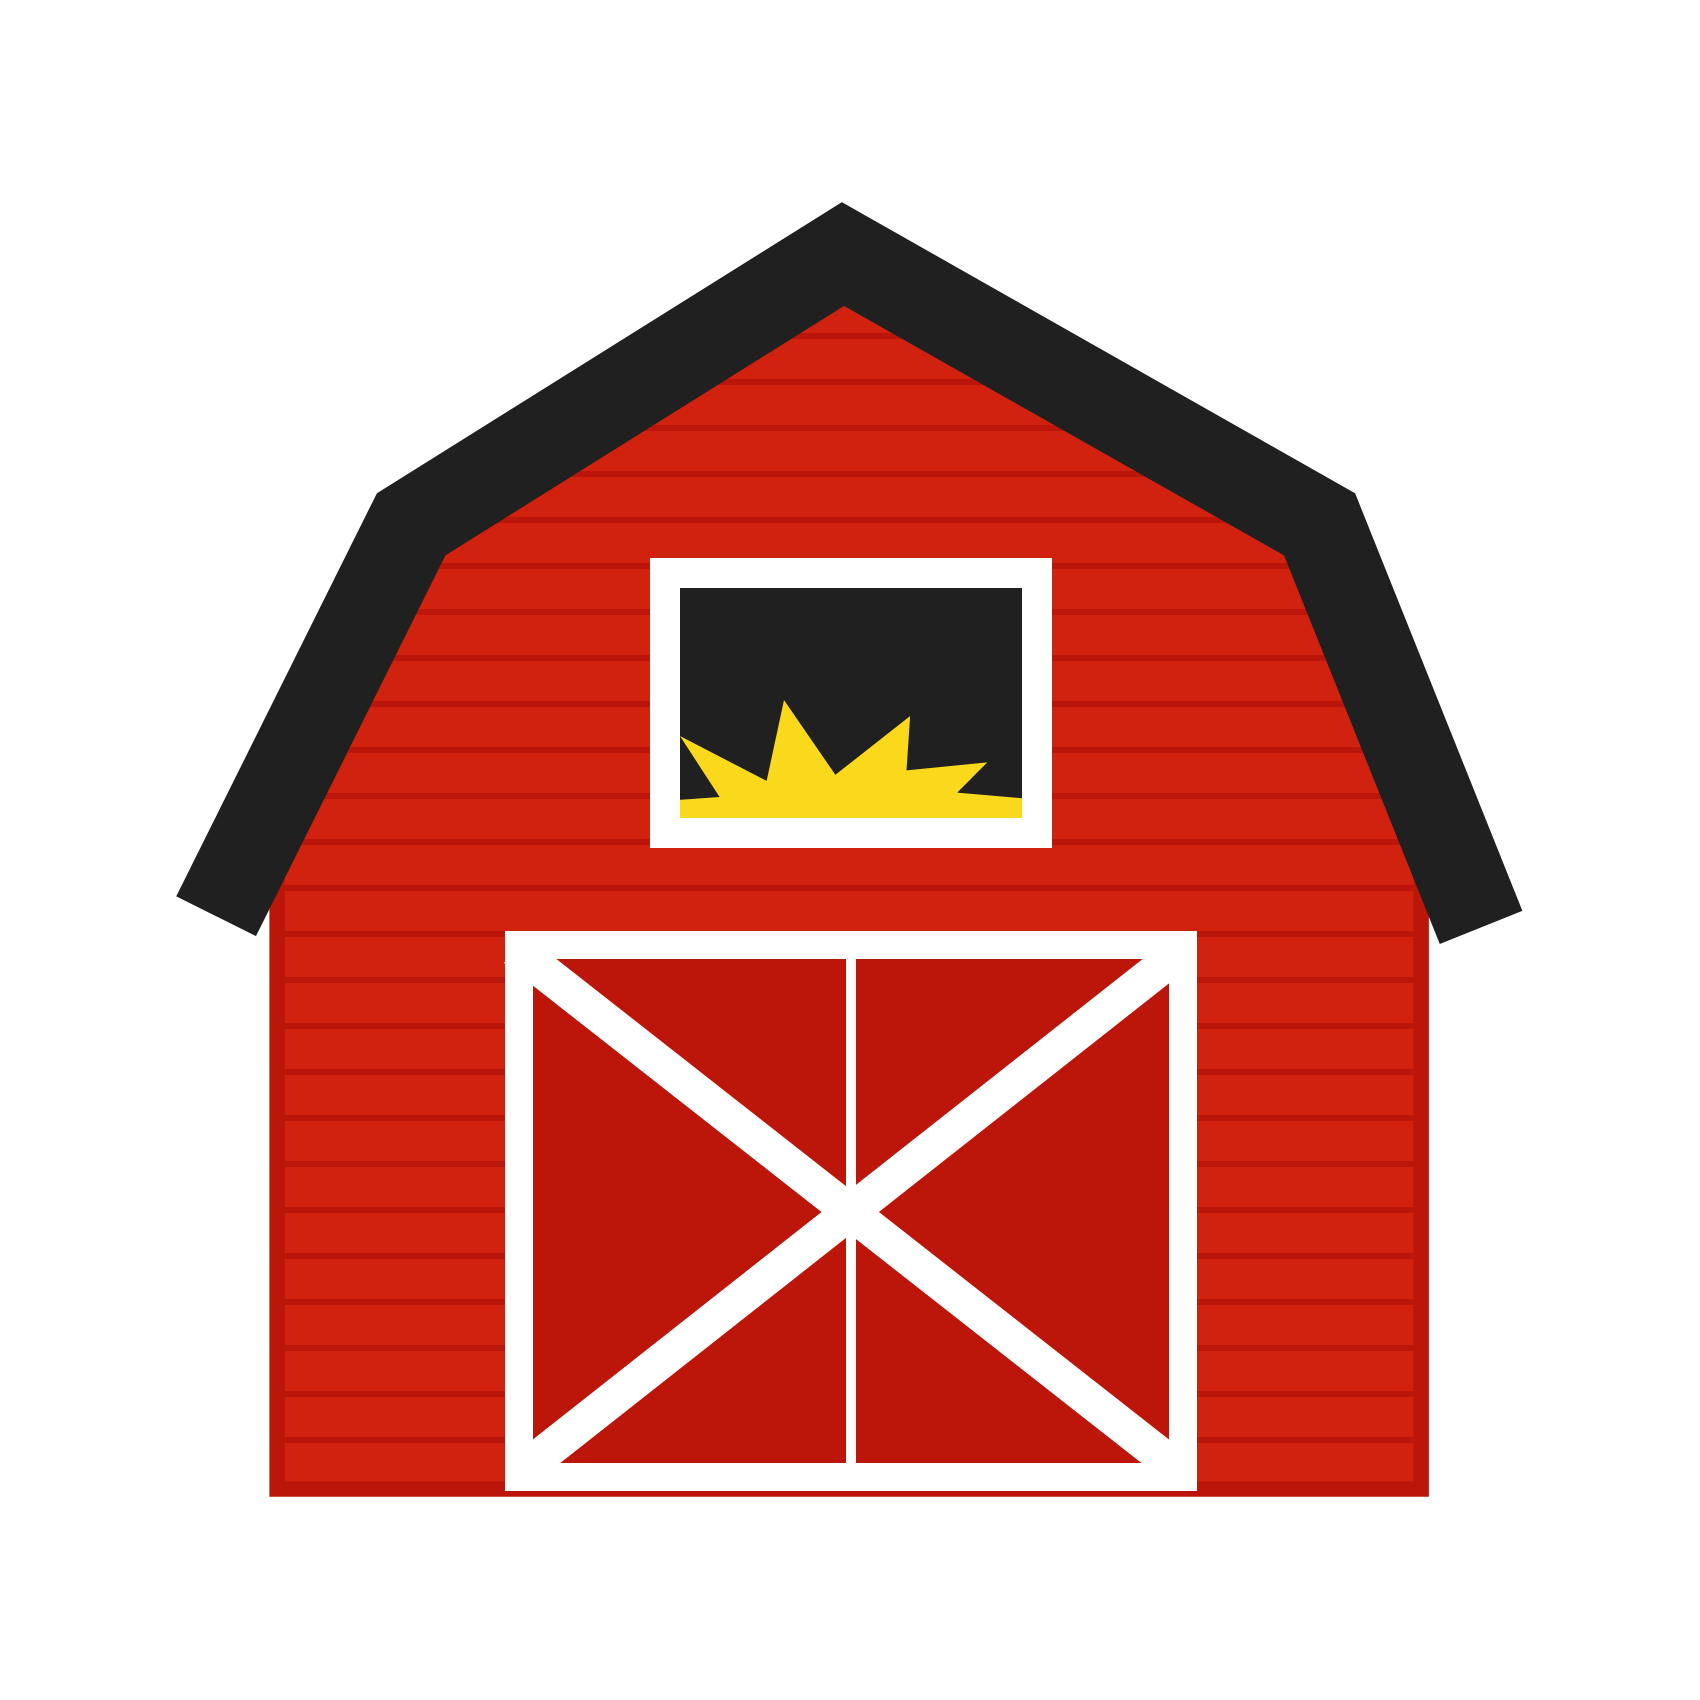 Free Cartoon Barn Pictures, Download Free Cartoon Barn Pictures png